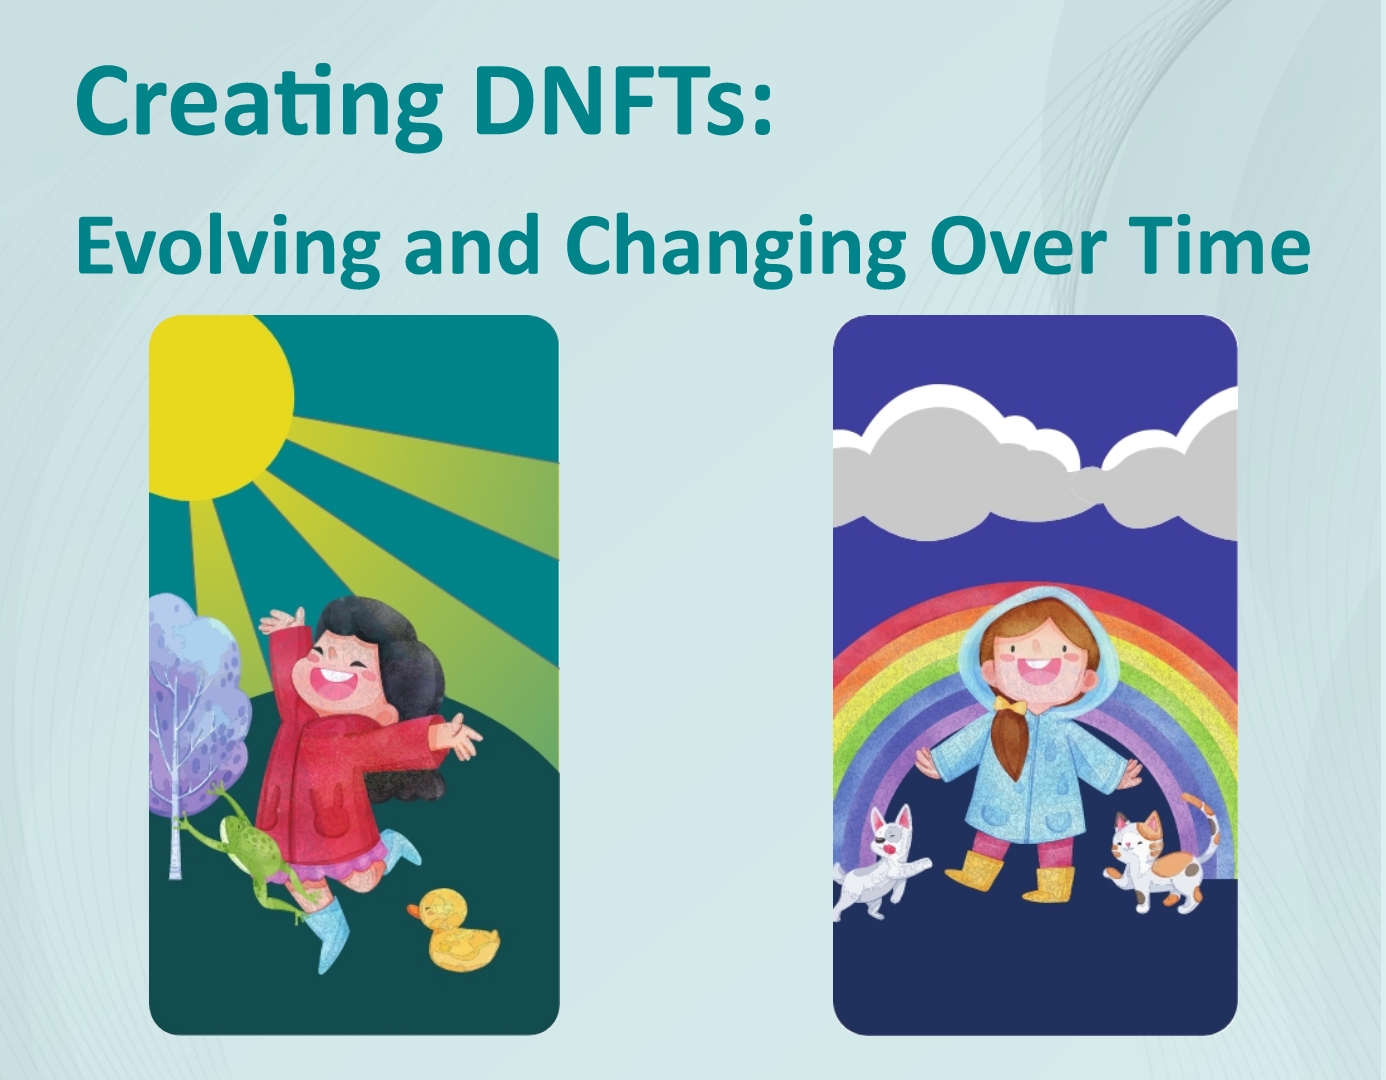 Creating DNFTs: Evolving and Changing Over Time